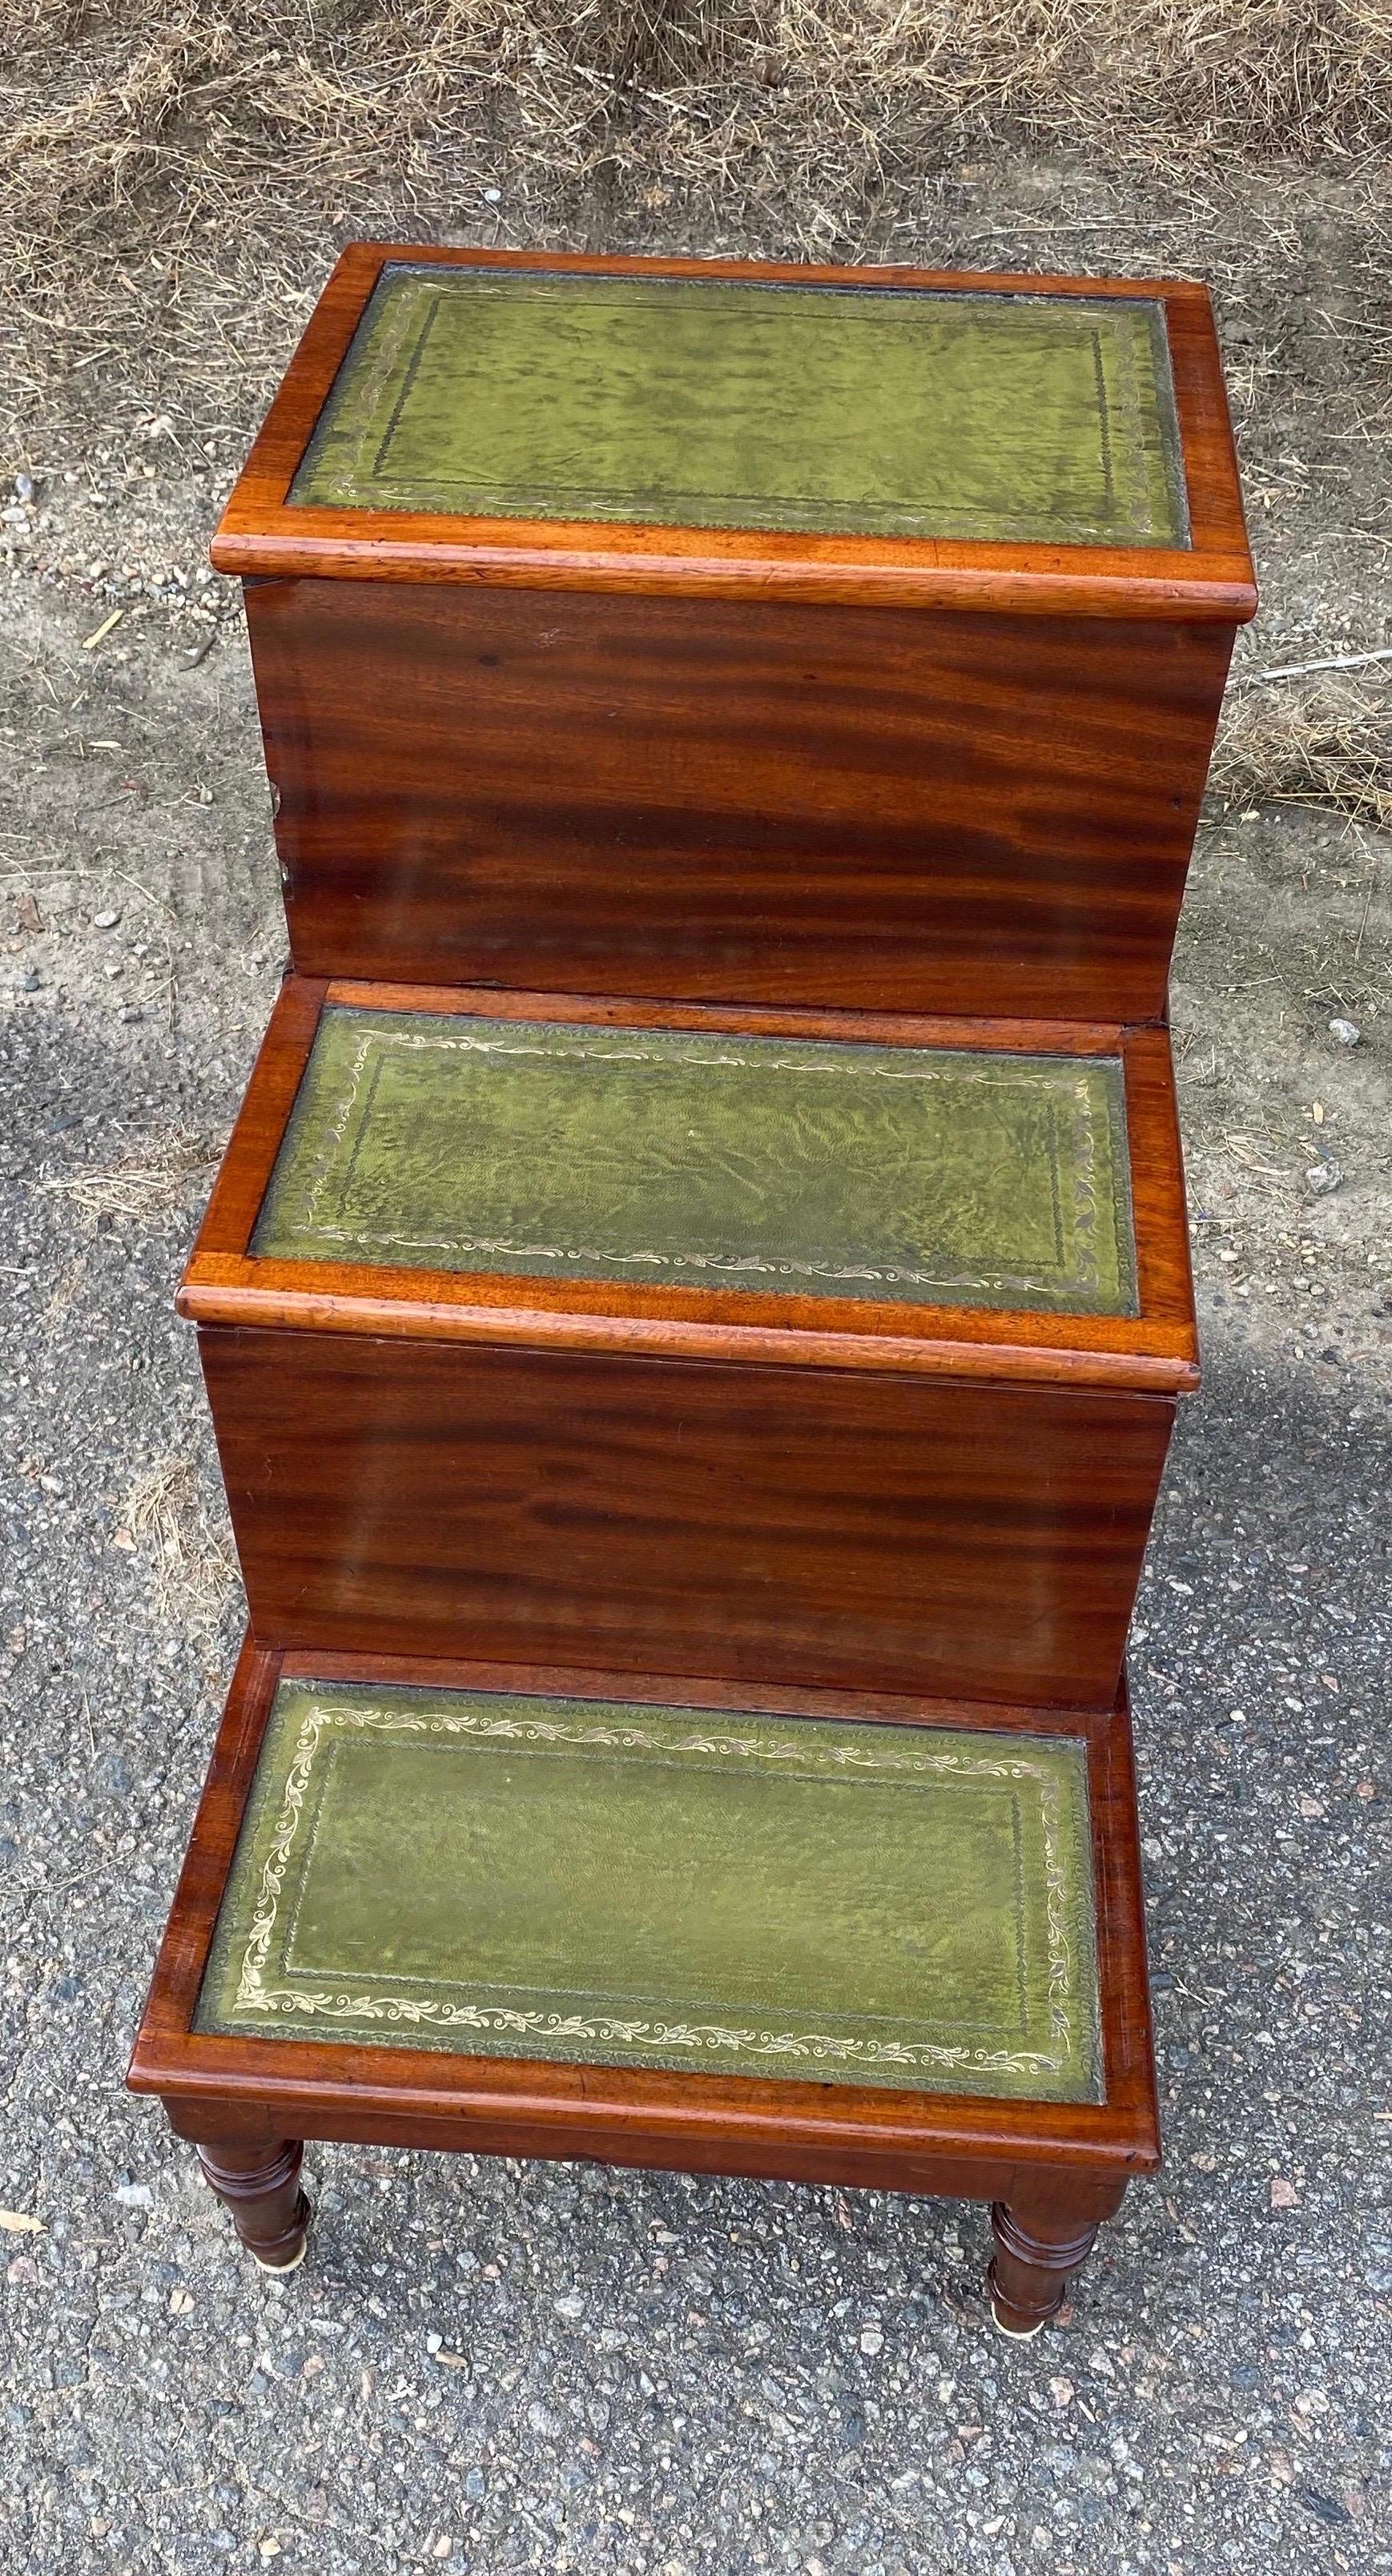 Great set of 19th century English mahogany and leather bedsteps with sliding chamber drawer.